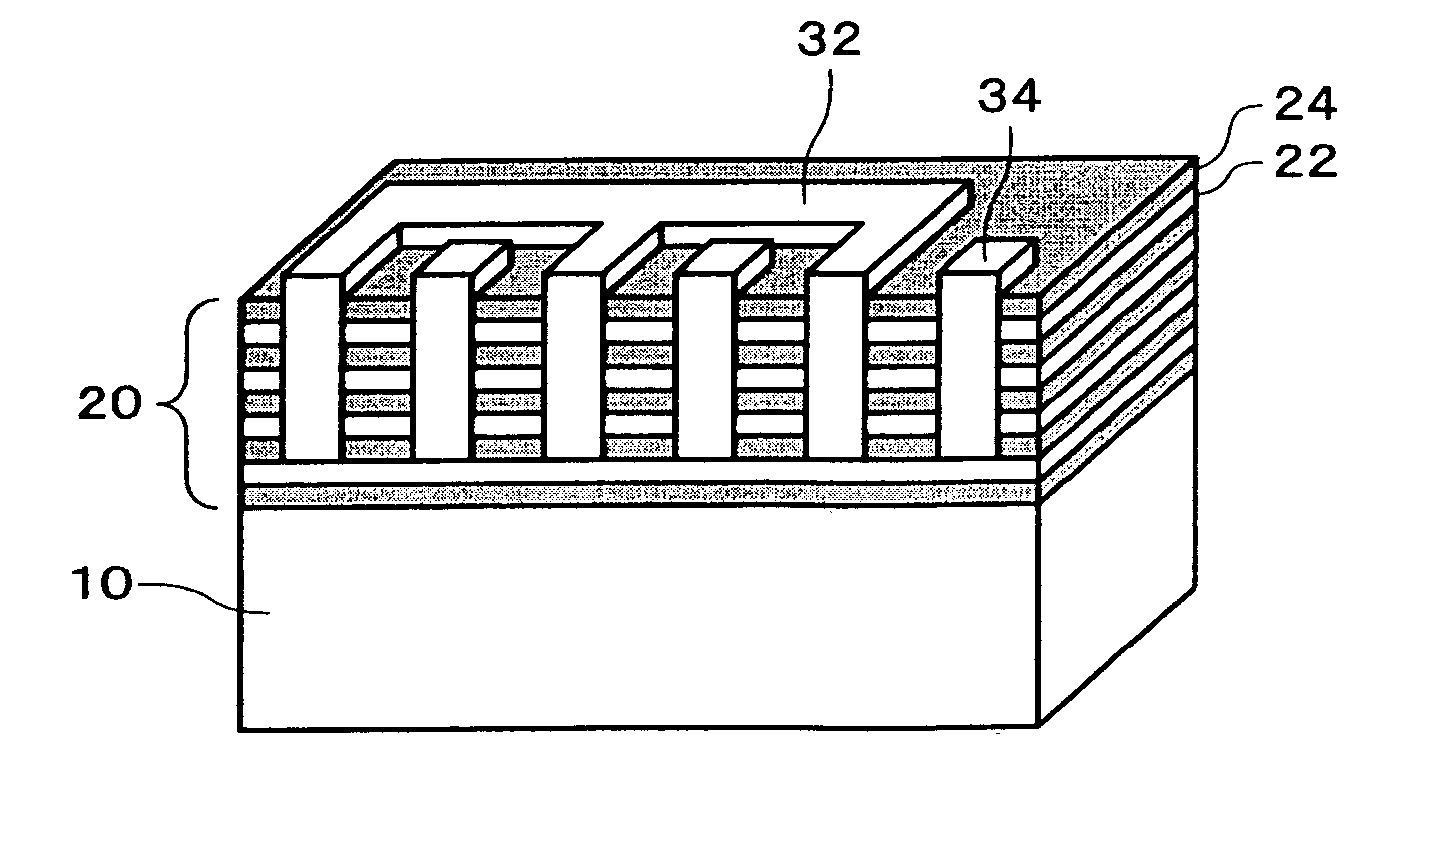 Photodetectors, optical modules, and optical transmission devices